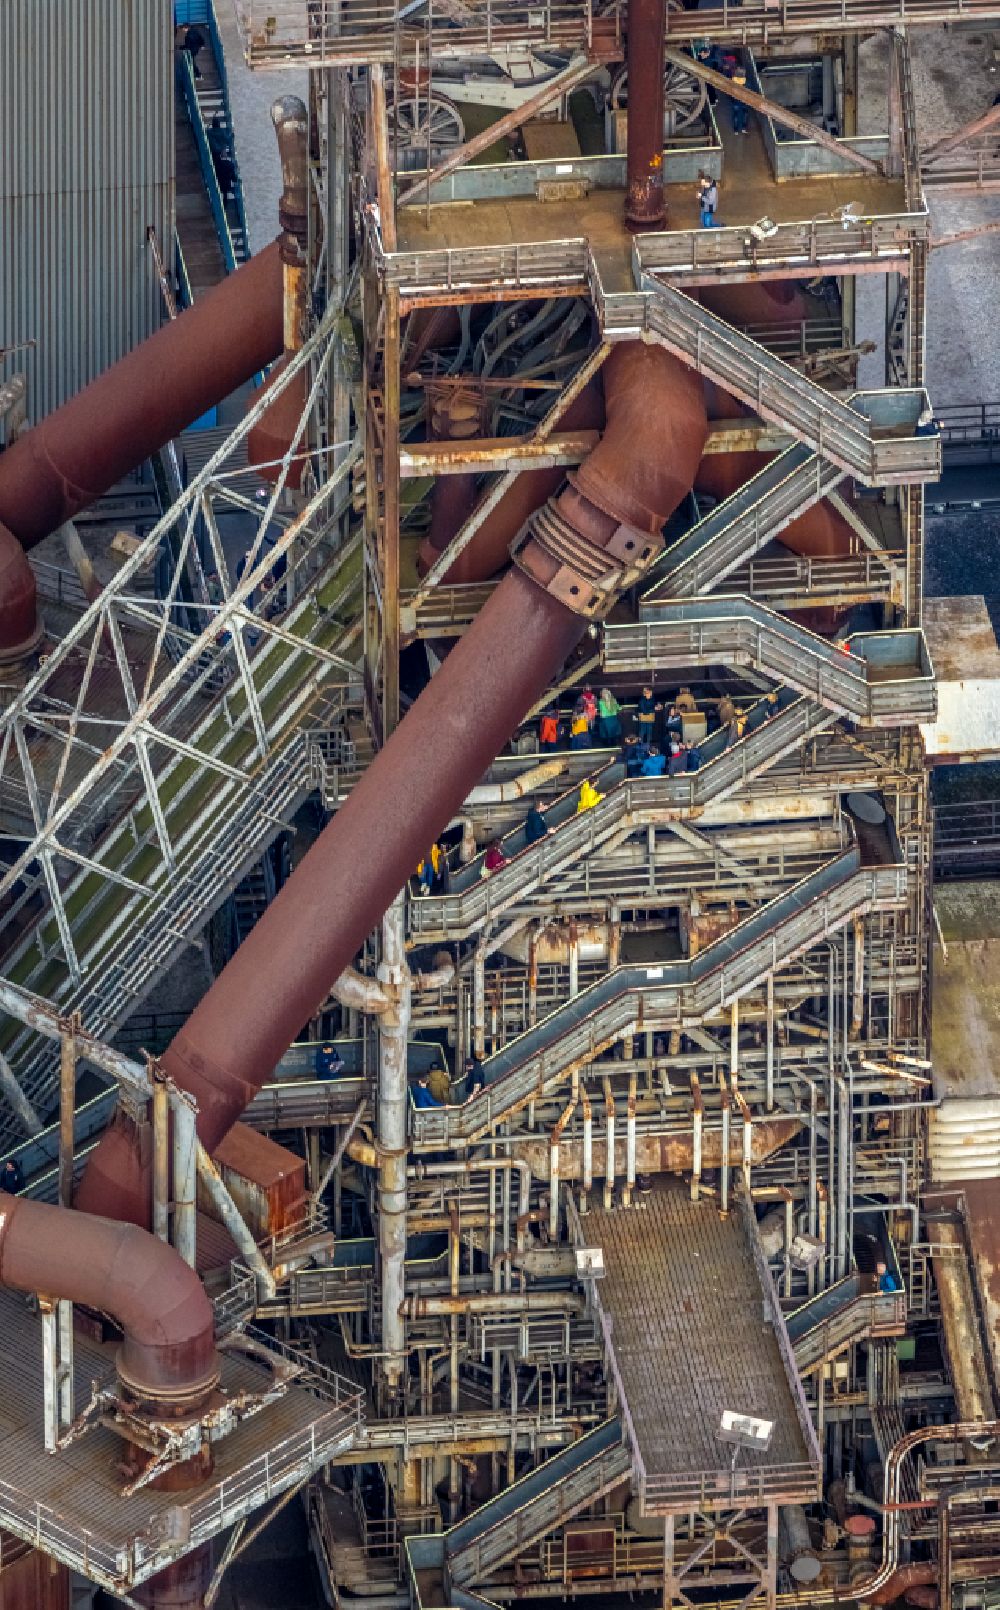 Aerial image Duisburg - Technical equipment and production facilities of the steelworks Meiderich in Duisburg in the state North Rhine-Westphalia